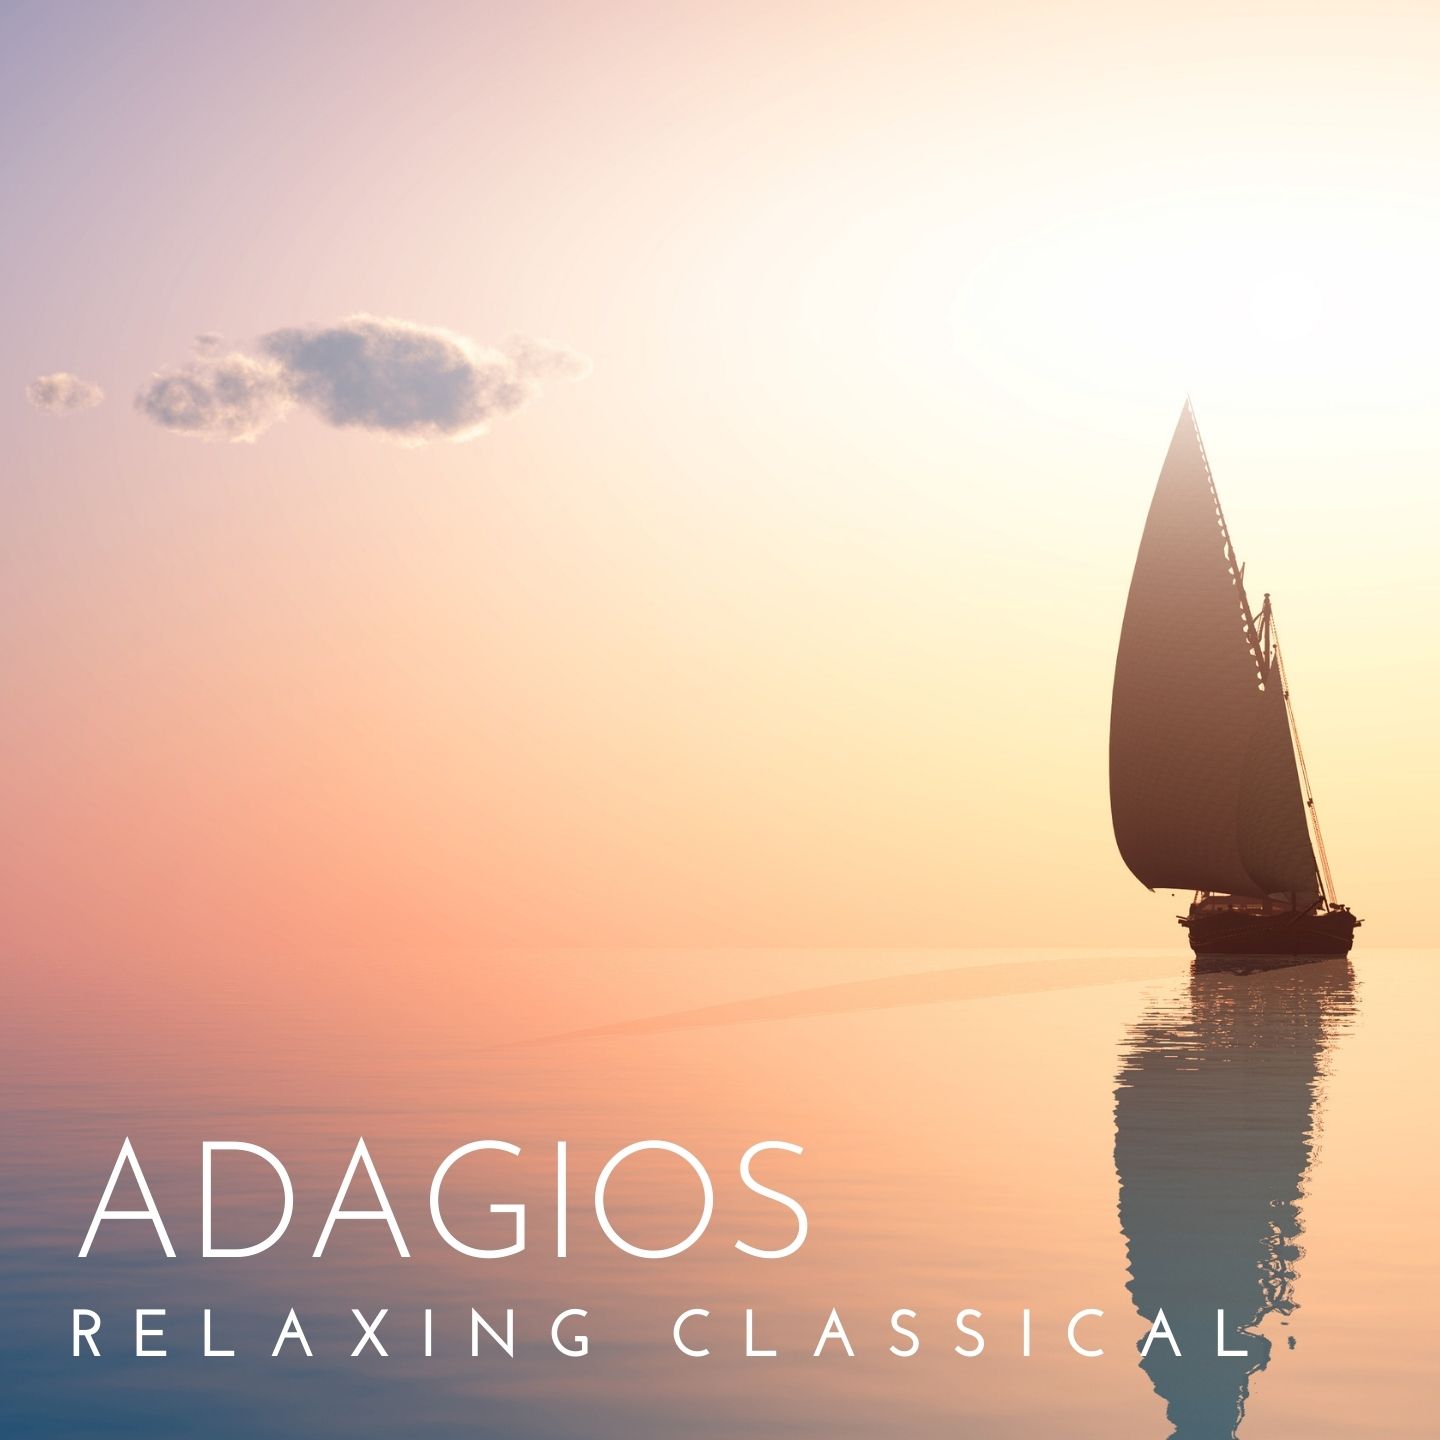 Adagios: Most Relaxing Classical Music